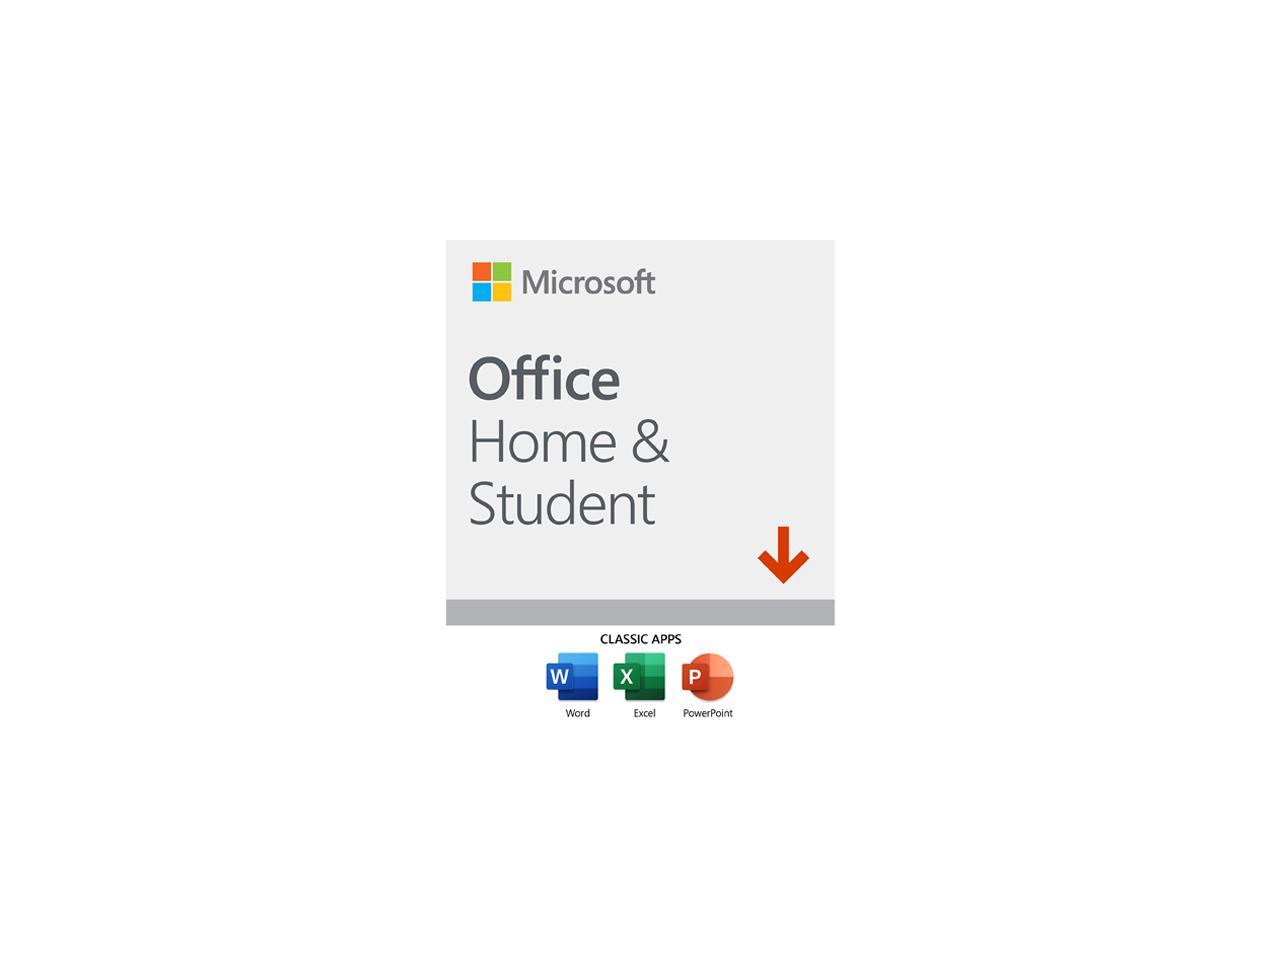 Microsoft Office Home and Student 2019 - 1 Device, Windows 10 PC/Mac Download